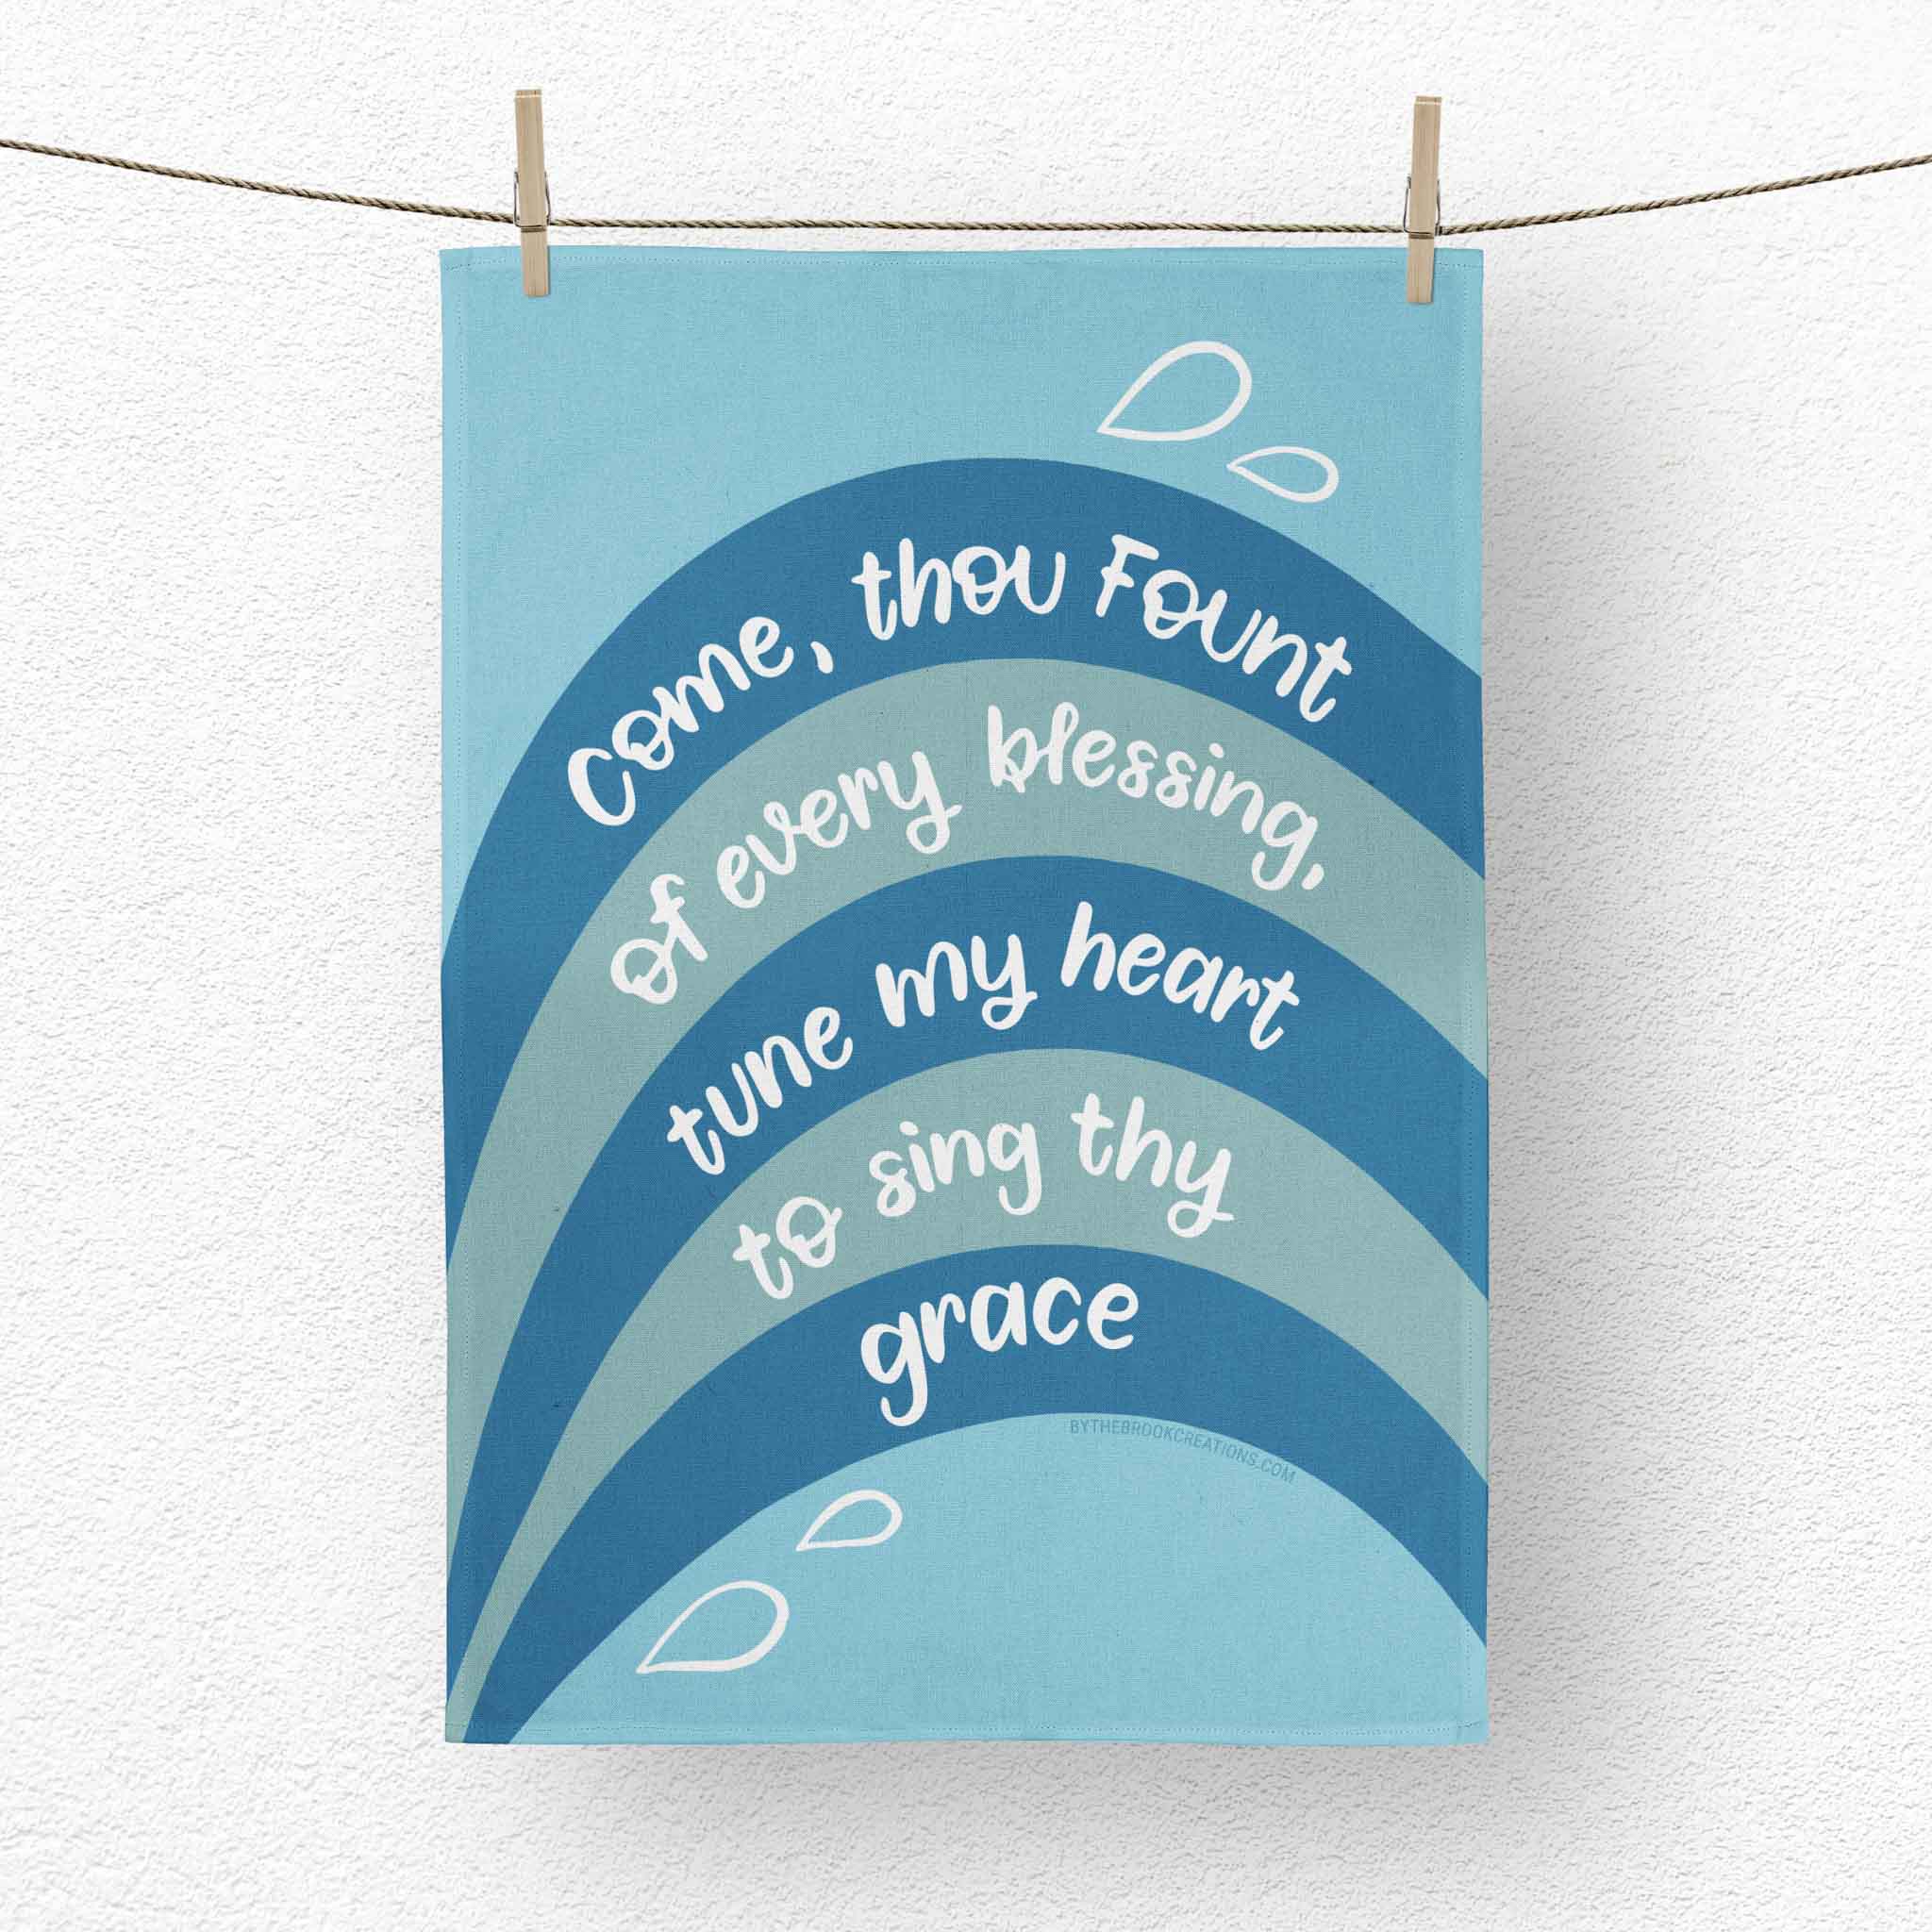 https://cdn.shopify.com/s/files/1/0503/2309/5713/products/come-thou-fount-of-every-blessing-christian-hymn-tea-towel-hanging.jpg?v=1663162068&width=2048